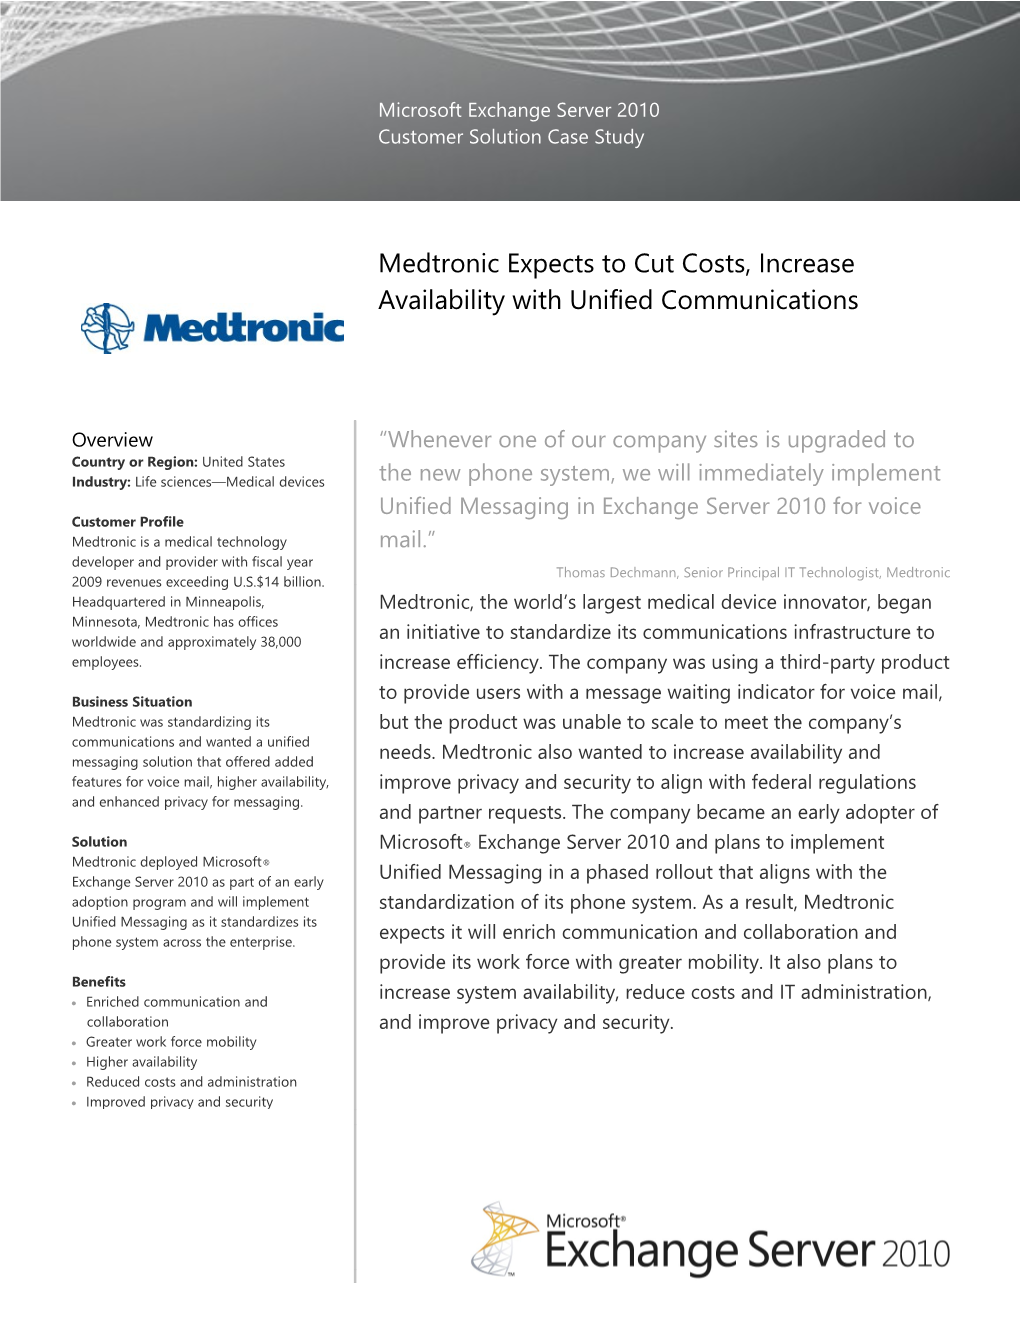 Medtronic Expects to Cut Costs, Increase Availability with Unified Communications